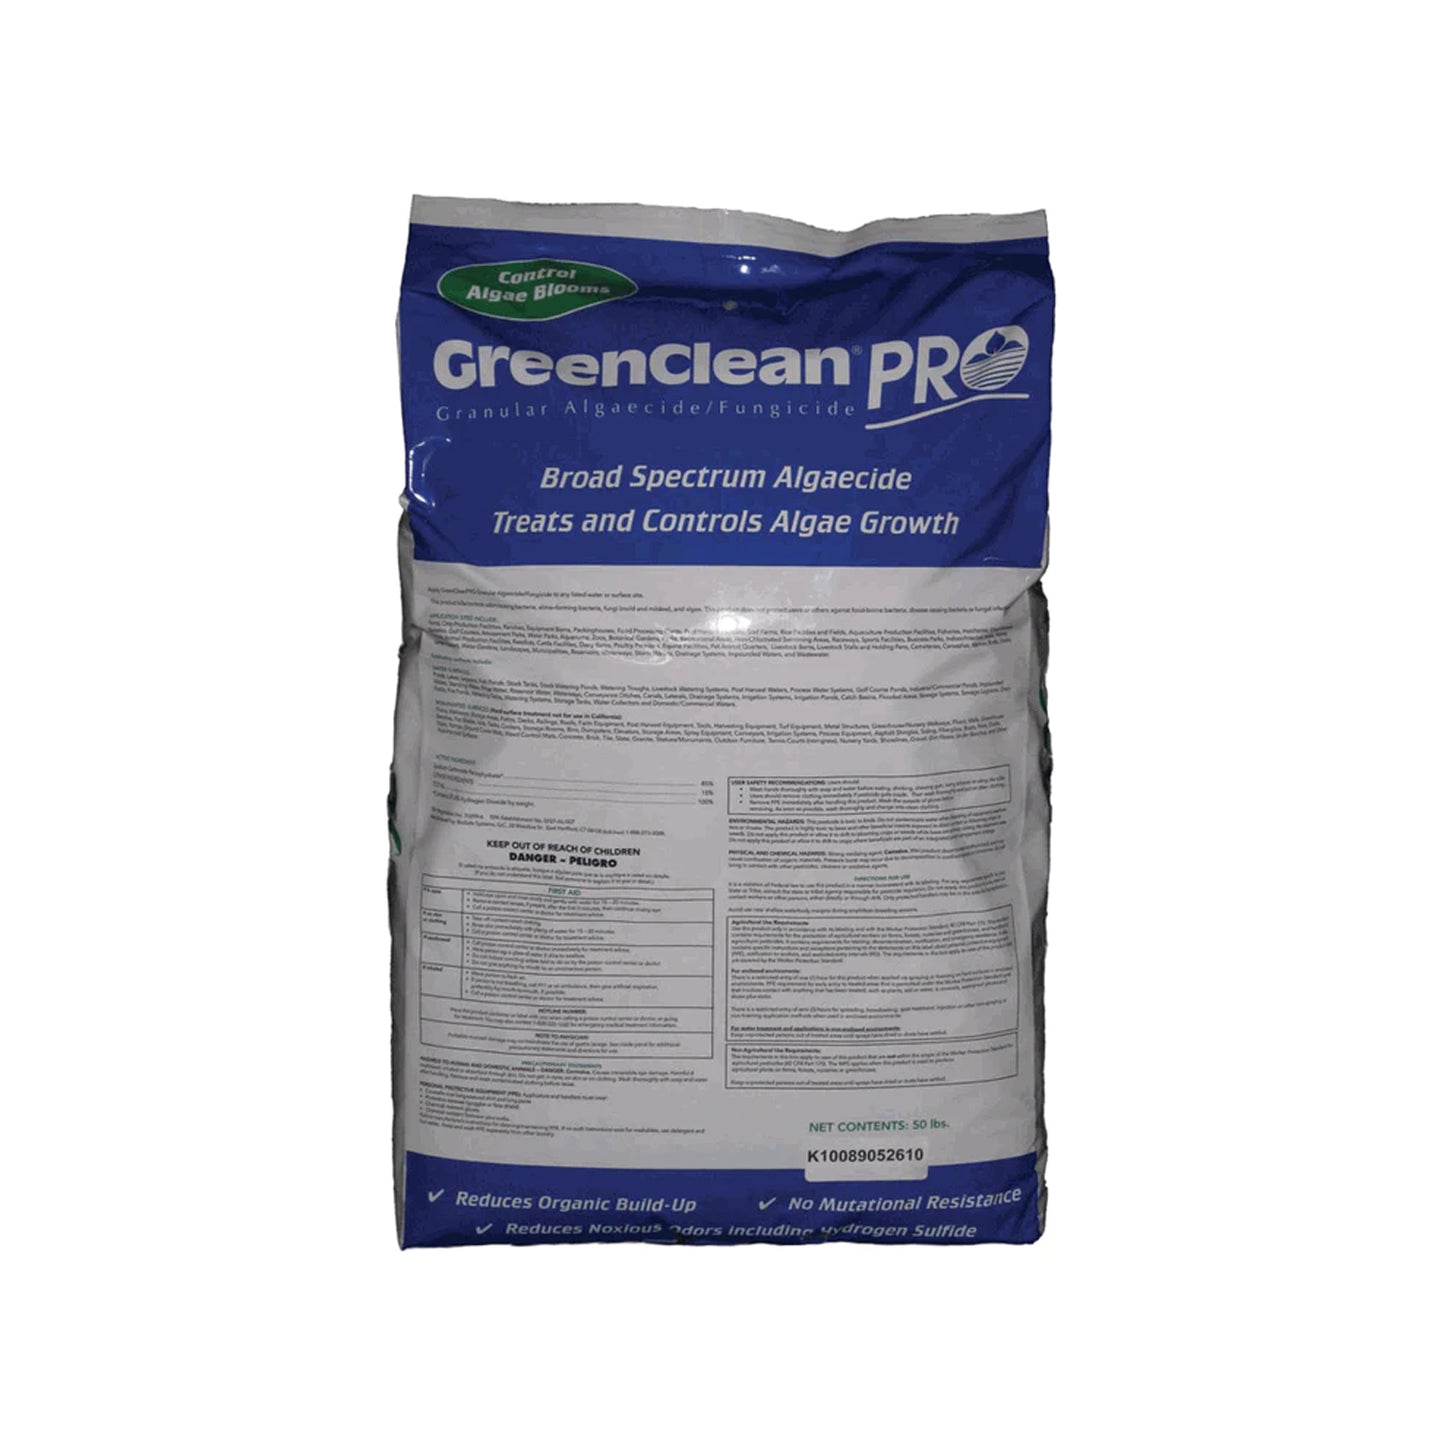 GreenClean Pro Algaecide for Ponds 50lbs